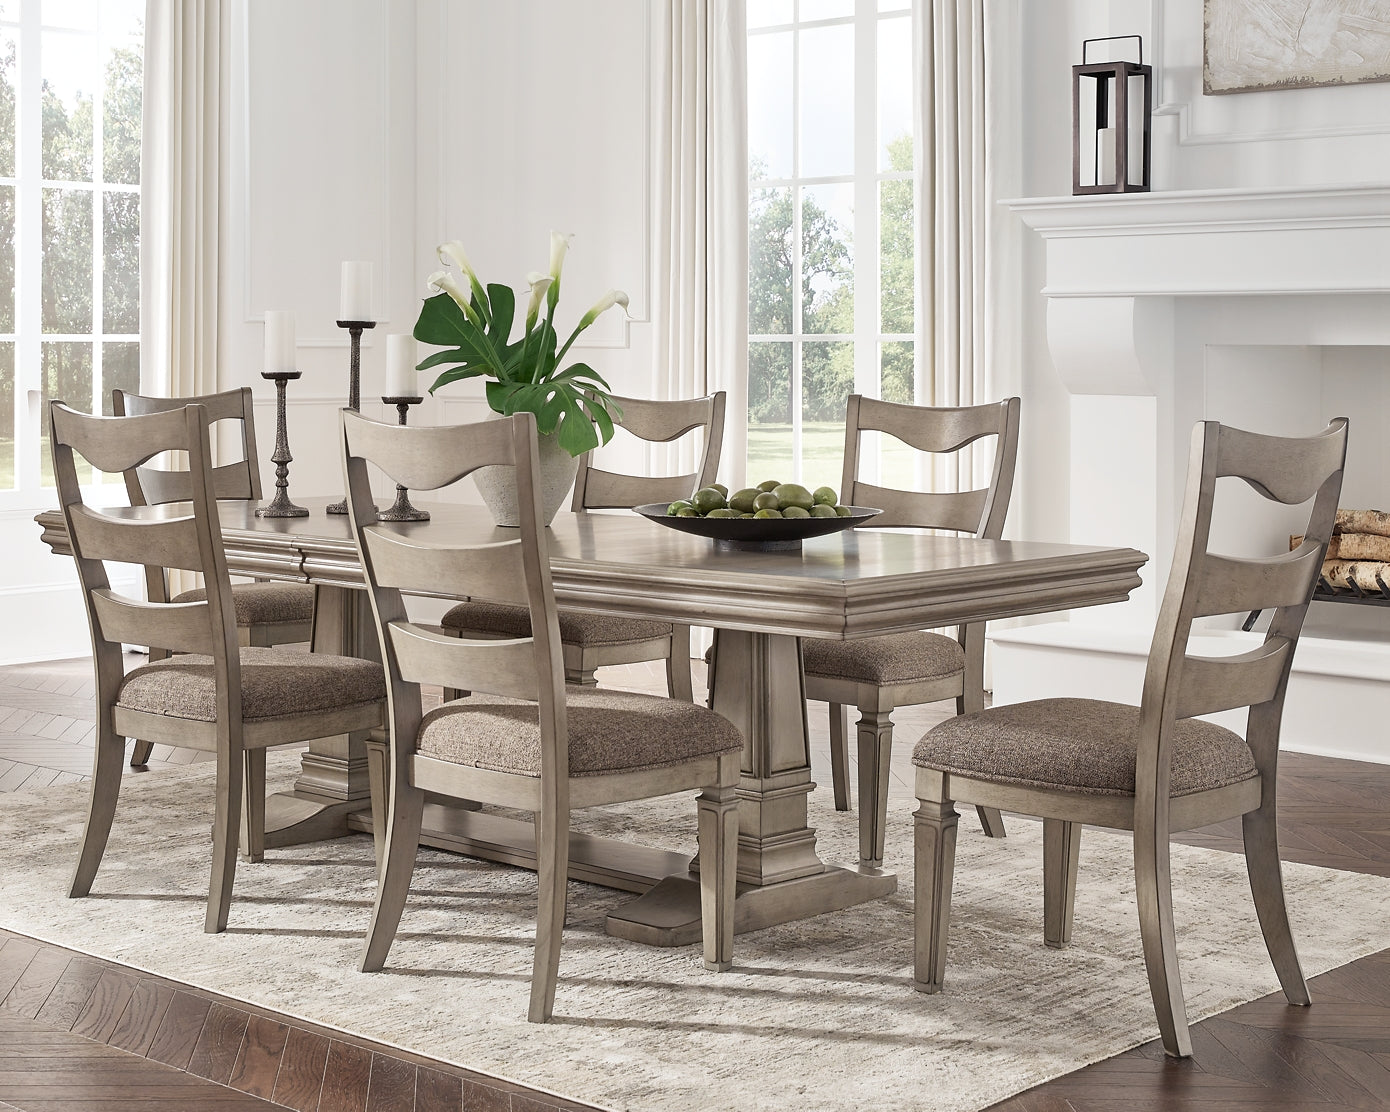 Lexorne Dining Table and 6 Chairs JB's Furniture  Home Furniture, Home Decor, Furniture Store